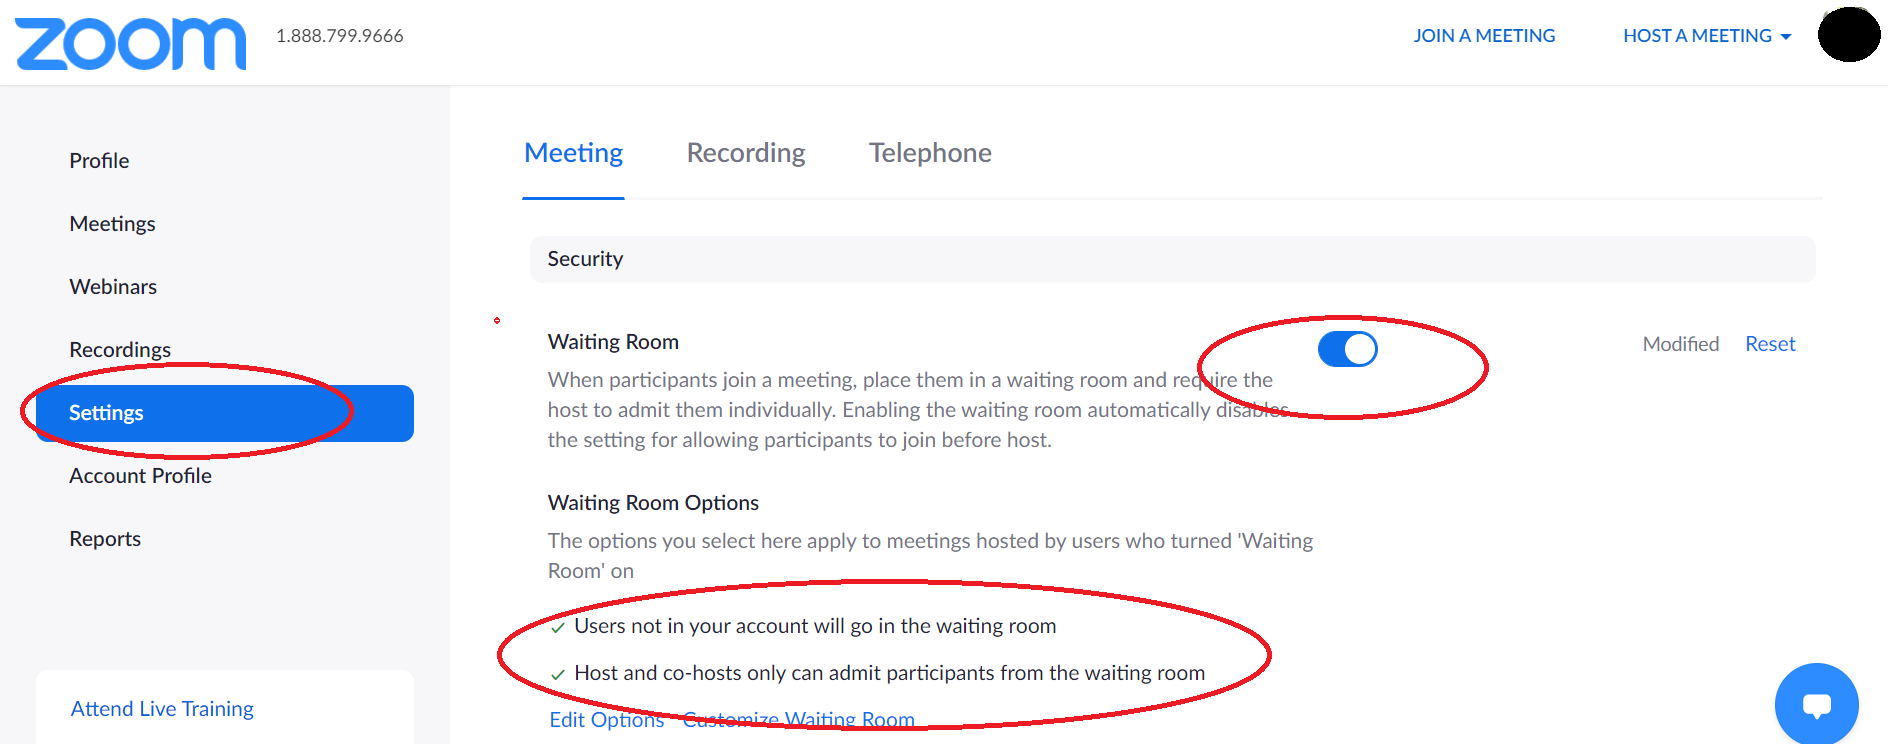 Confirm the waiting room is enabled and only hosts and co-hosts may admit participants.